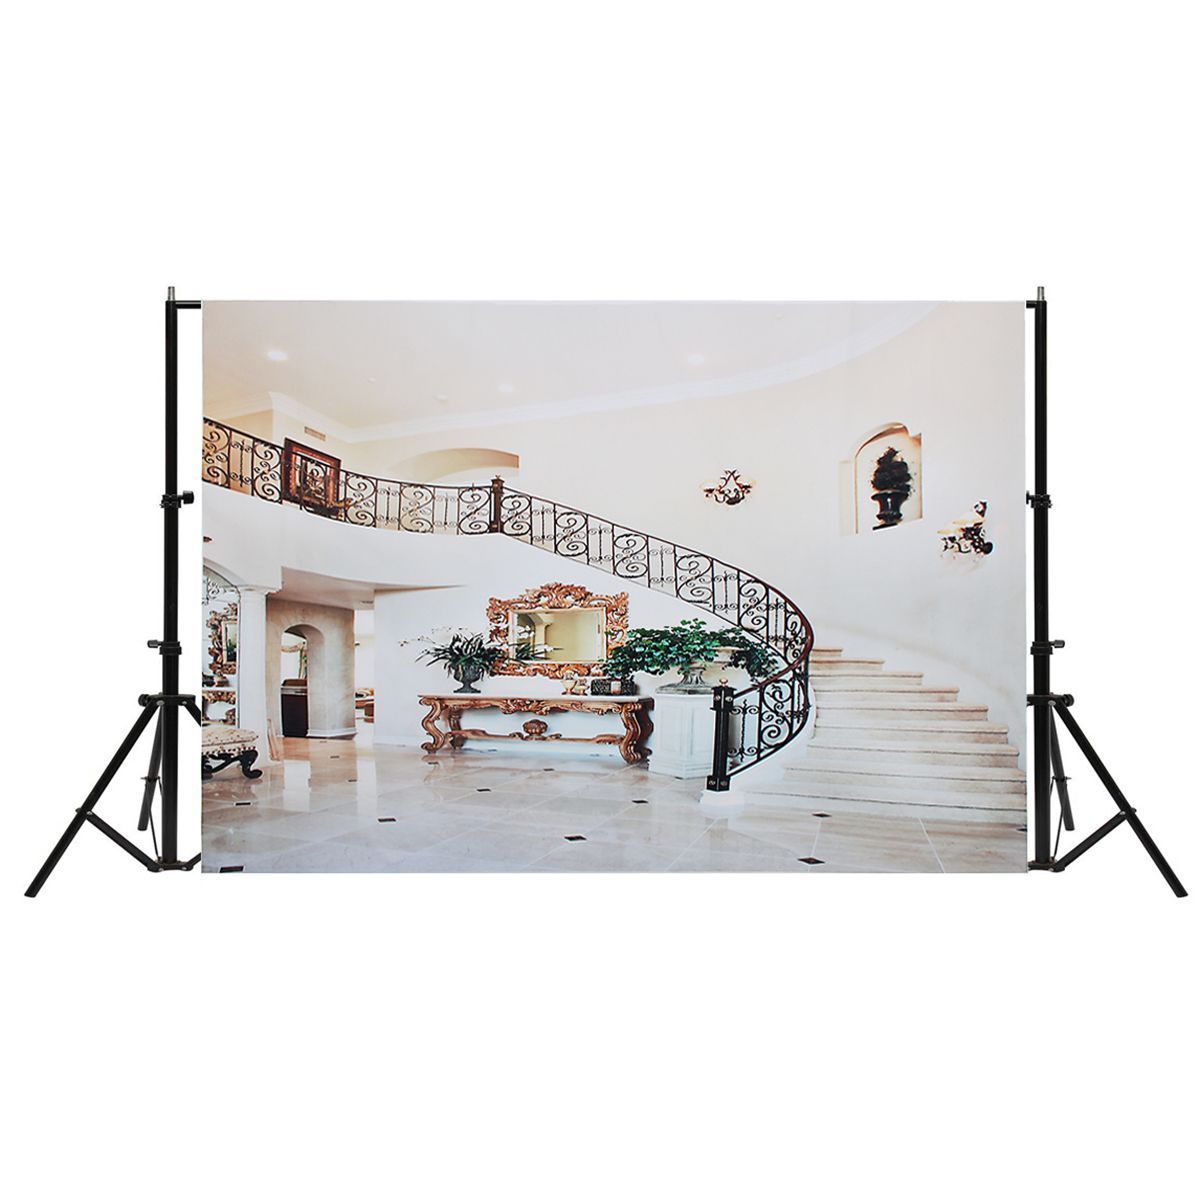 7x5FT-Stairs-Luxury-Building-Photography-Backdrop-Studio-Prop-Background-1599081